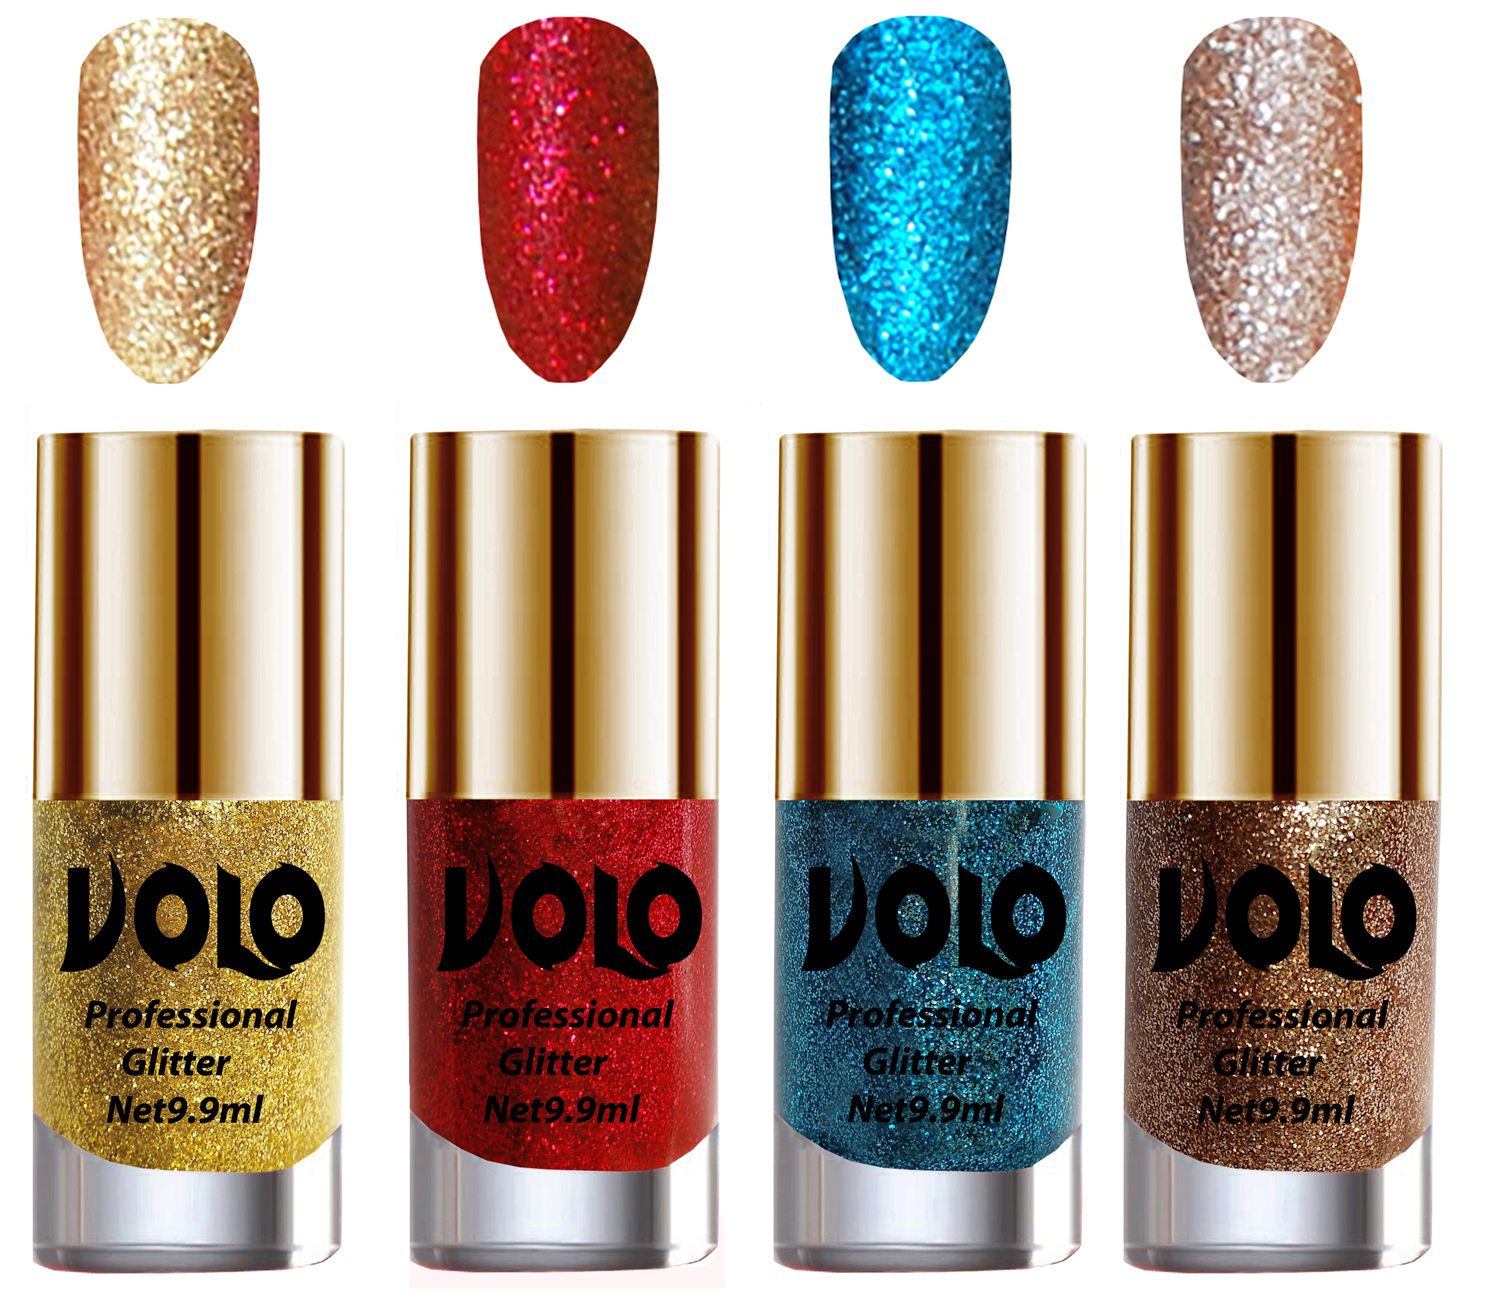     			VOLO Professionally Used Glitter Shine Nail Polish Gold,Red,Blue Gold Pack of 4 39 mL